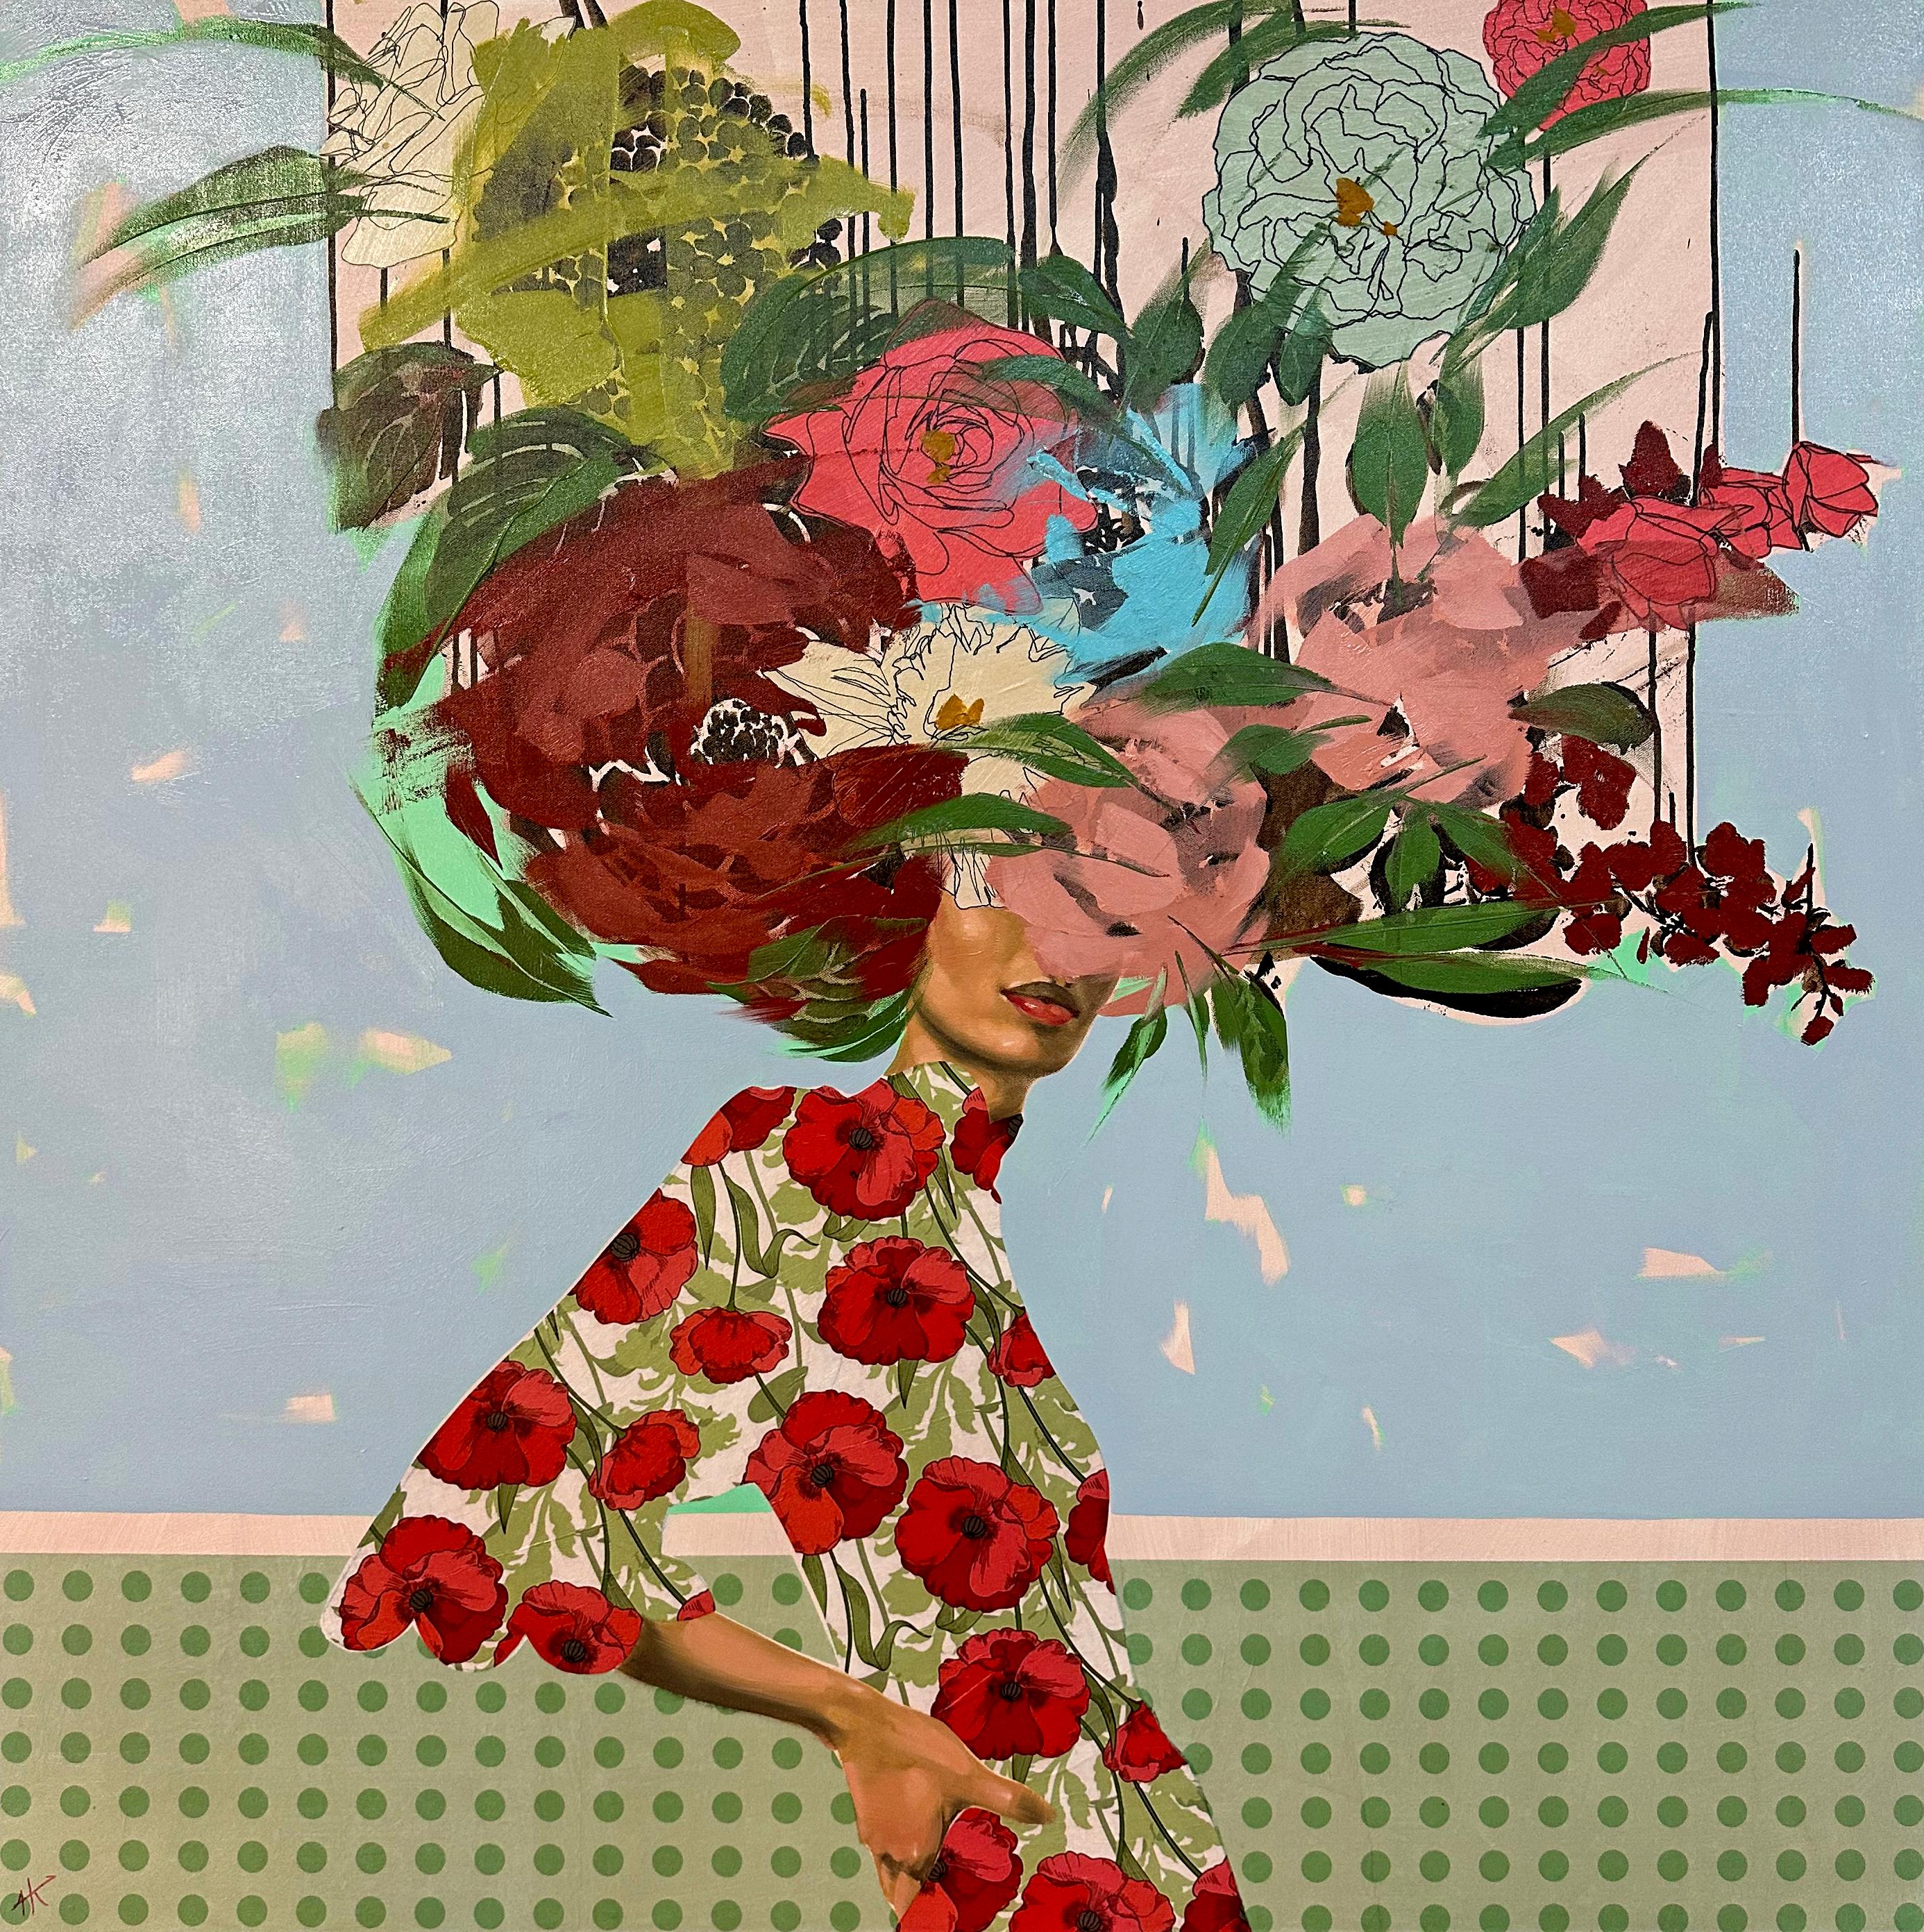 ANNA KINCAIDE
"Beautiful Mistakes"
Oil & Mixed Media on Canvas
48 x 48 inches

Communicating emotion and narrative with limited assistance from her figure’s facial expressions, Anna Kincaide creates cascades of flowers that cover her subjects to